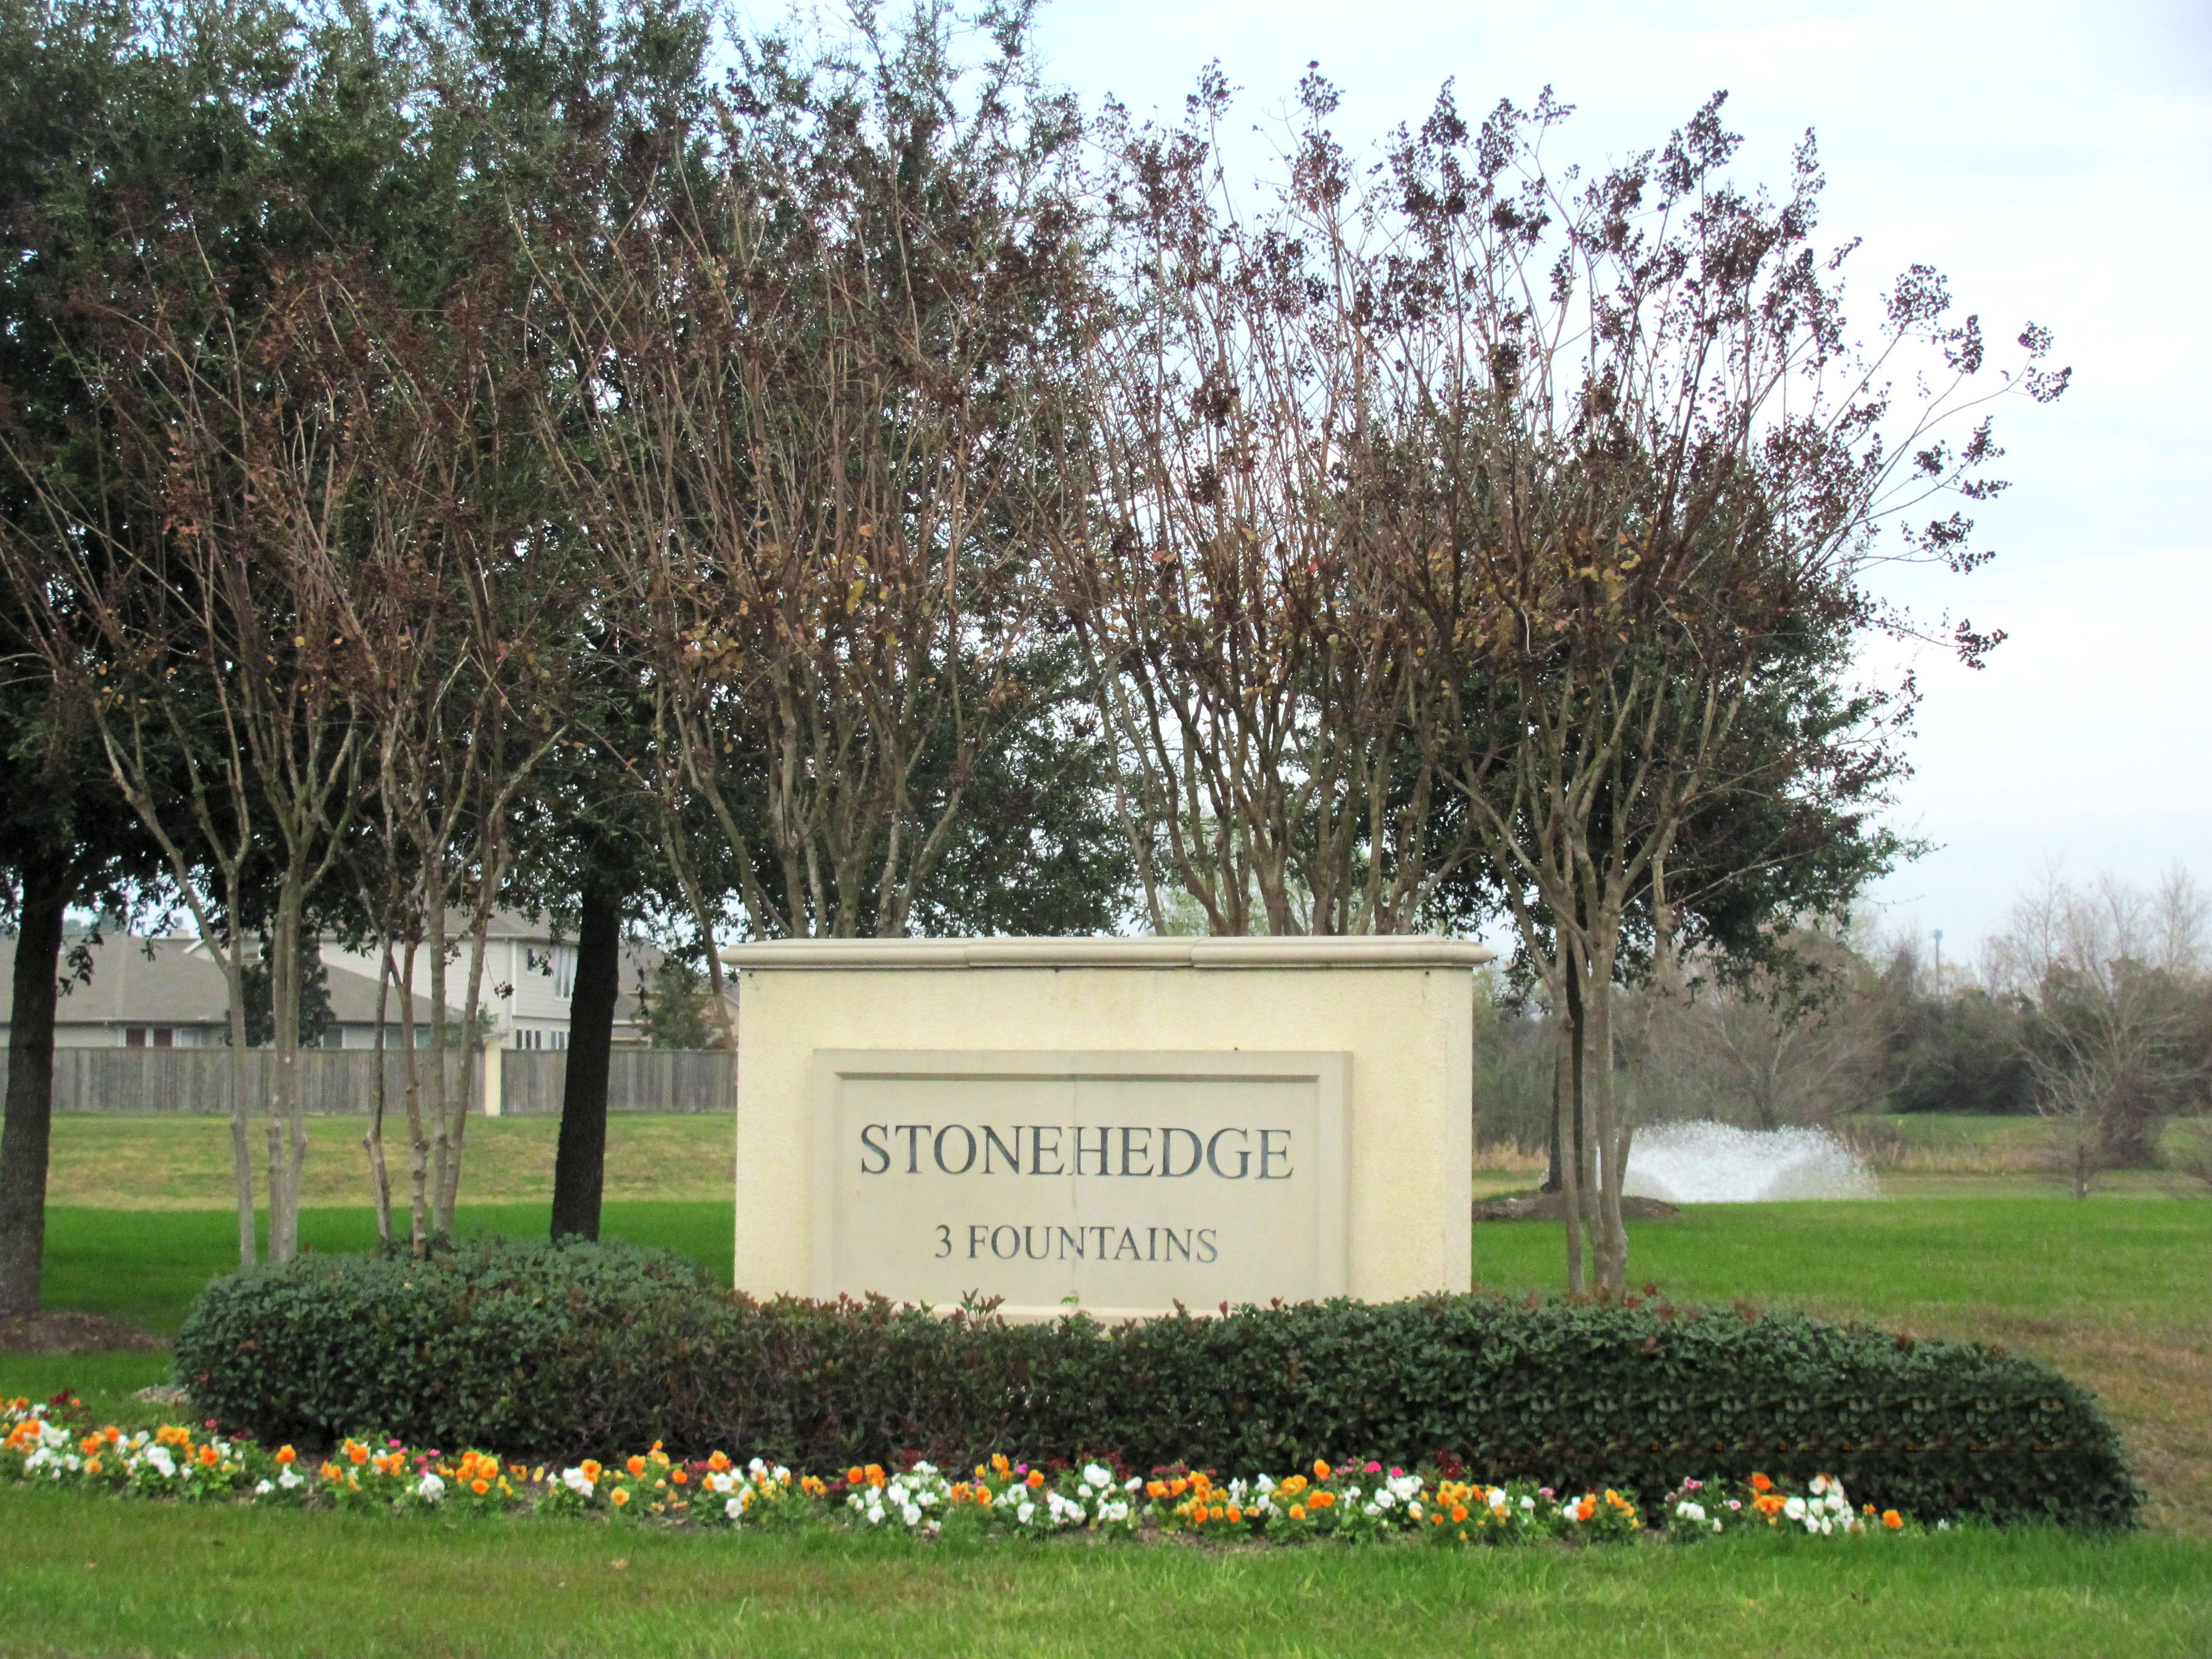 Owners Association of Stonehedge